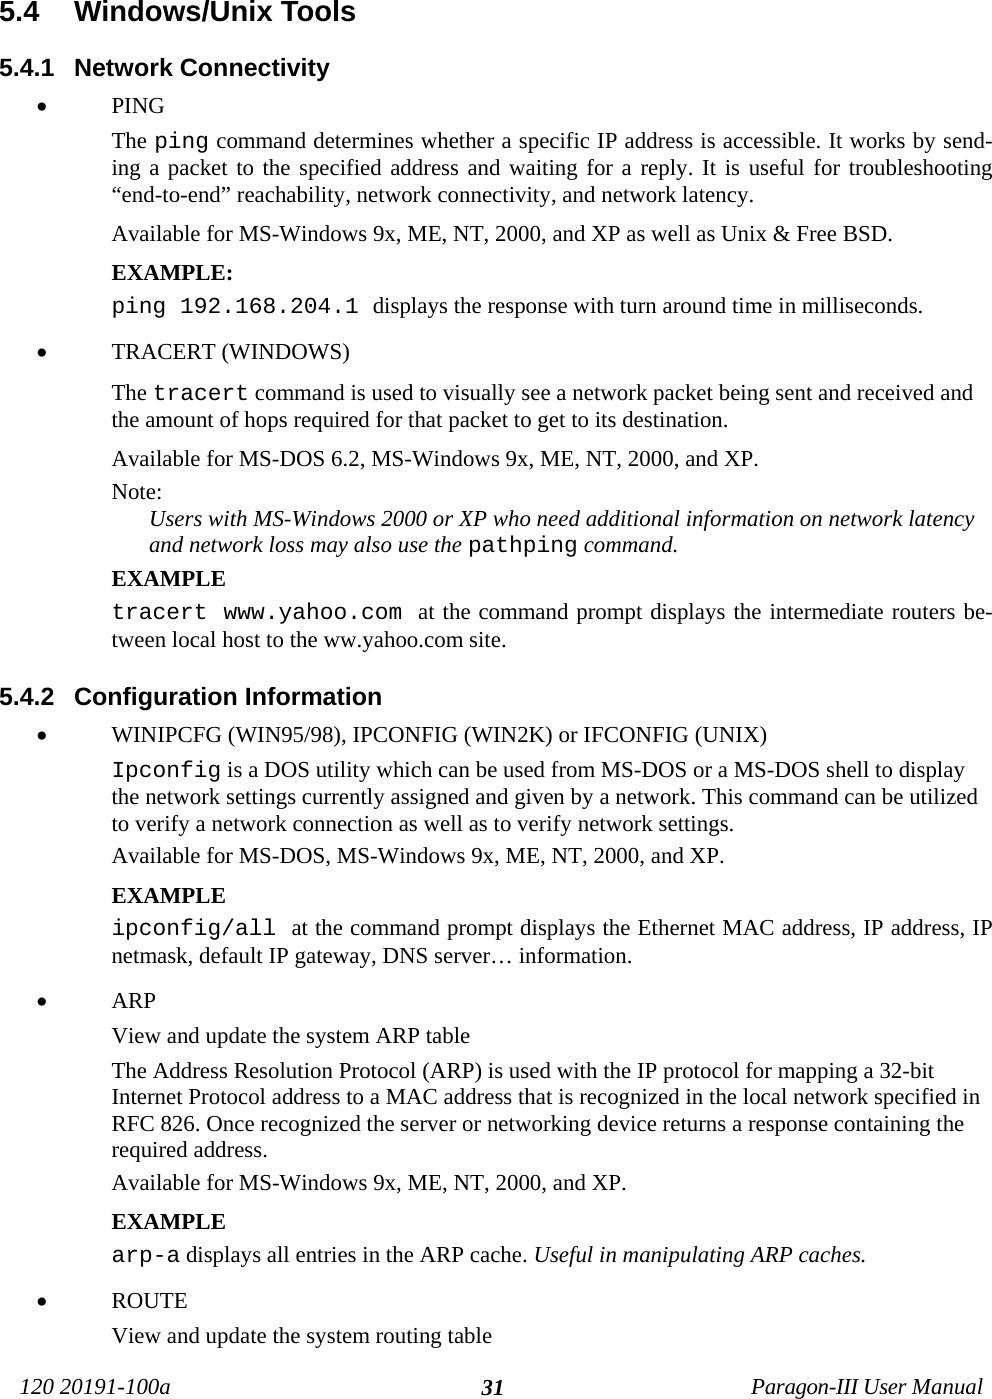 120 20191-100a Paragon-III User Manual315.4  Windows/Unix Tools5.4.1  Network Connectivity• PINGThe ping command determines whether a specific IP address is accessible. It works by send-ing a packet to the specified address and waiting for a reply. It is useful for troubleshooting“end-to-end” reachability, network connectivity, and network latency.Available for MS-Windows 9x, ME, NT, 2000, and XP as well as Unix &amp; Free BSD.EXAMPLE:ping 192.168.204.1 displays the response with turn around time in milliseconds.• TRACERT (WINDOWS)The tracert command is used to visually see a network packet being sent and received andthe amount of hops required for that packet to get to its destination. Available for MS-DOS 6.2, MS-Windows 9x, ME, NT, 2000, and XP.Note:Users with MS-Windows 2000 or XP who need additional information on network latencyand network loss may also use the pathping command.EXAMPLEtracert www.yahoo.com at the command prompt displays the intermediate routers be-tween local host to the ww.yahoo.com site.5.4.2  Configuration Information• WINIPCFG (WIN95/98), IPCONFIG (WIN2K) or IFCONFIG (UNIX) Ipconfig is a DOS utility which can be used from MS-DOS or a MS-DOS shell to displaythe network settings currently assigned and given by a network. This command can be utilizedto verify a network connection as well as to verify network settings.Available for MS-DOS, MS-Windows 9x, ME, NT, 2000, and XP.EXAMPLEipconfig/all at the command prompt displays the Ethernet MAC address, IP address, IPnetmask, default IP gateway, DNS server… information.• ARP View and update the system ARP tableThe Address Resolution Protocol (ARP) is used with the IP protocol for mapping a 32-bitInternet Protocol address to a MAC address that is recognized in the local network specified inRFC 826. Once recognized the server or networking device returns a response containing therequired address.Available for MS-Windows 9x, ME, NT, 2000, and XP.EXAMPLEarp-a displays all entries in the ARP cache. Useful in manipulating ARP caches.• ROUTE View and update the system routing table